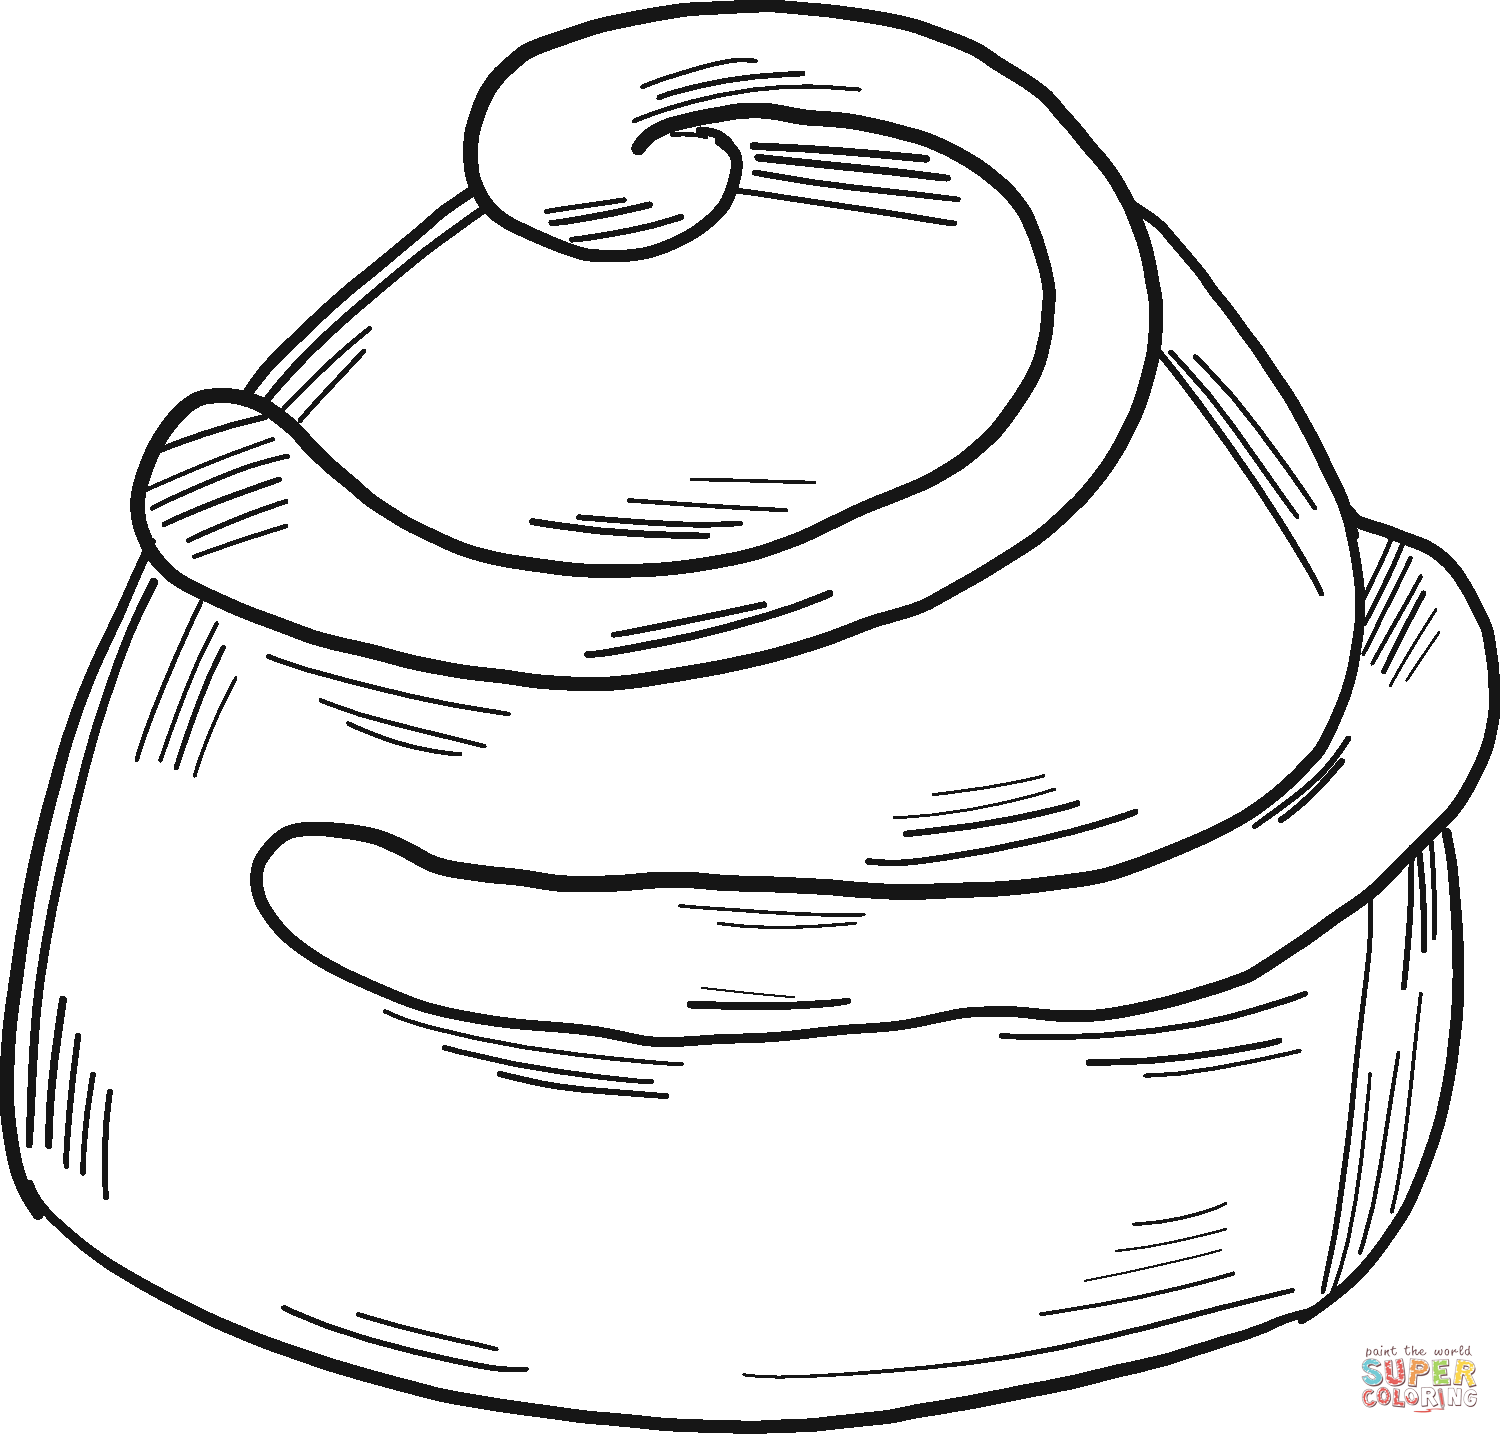 Chocolate Candy coloring page | Free Printable Coloring Pages